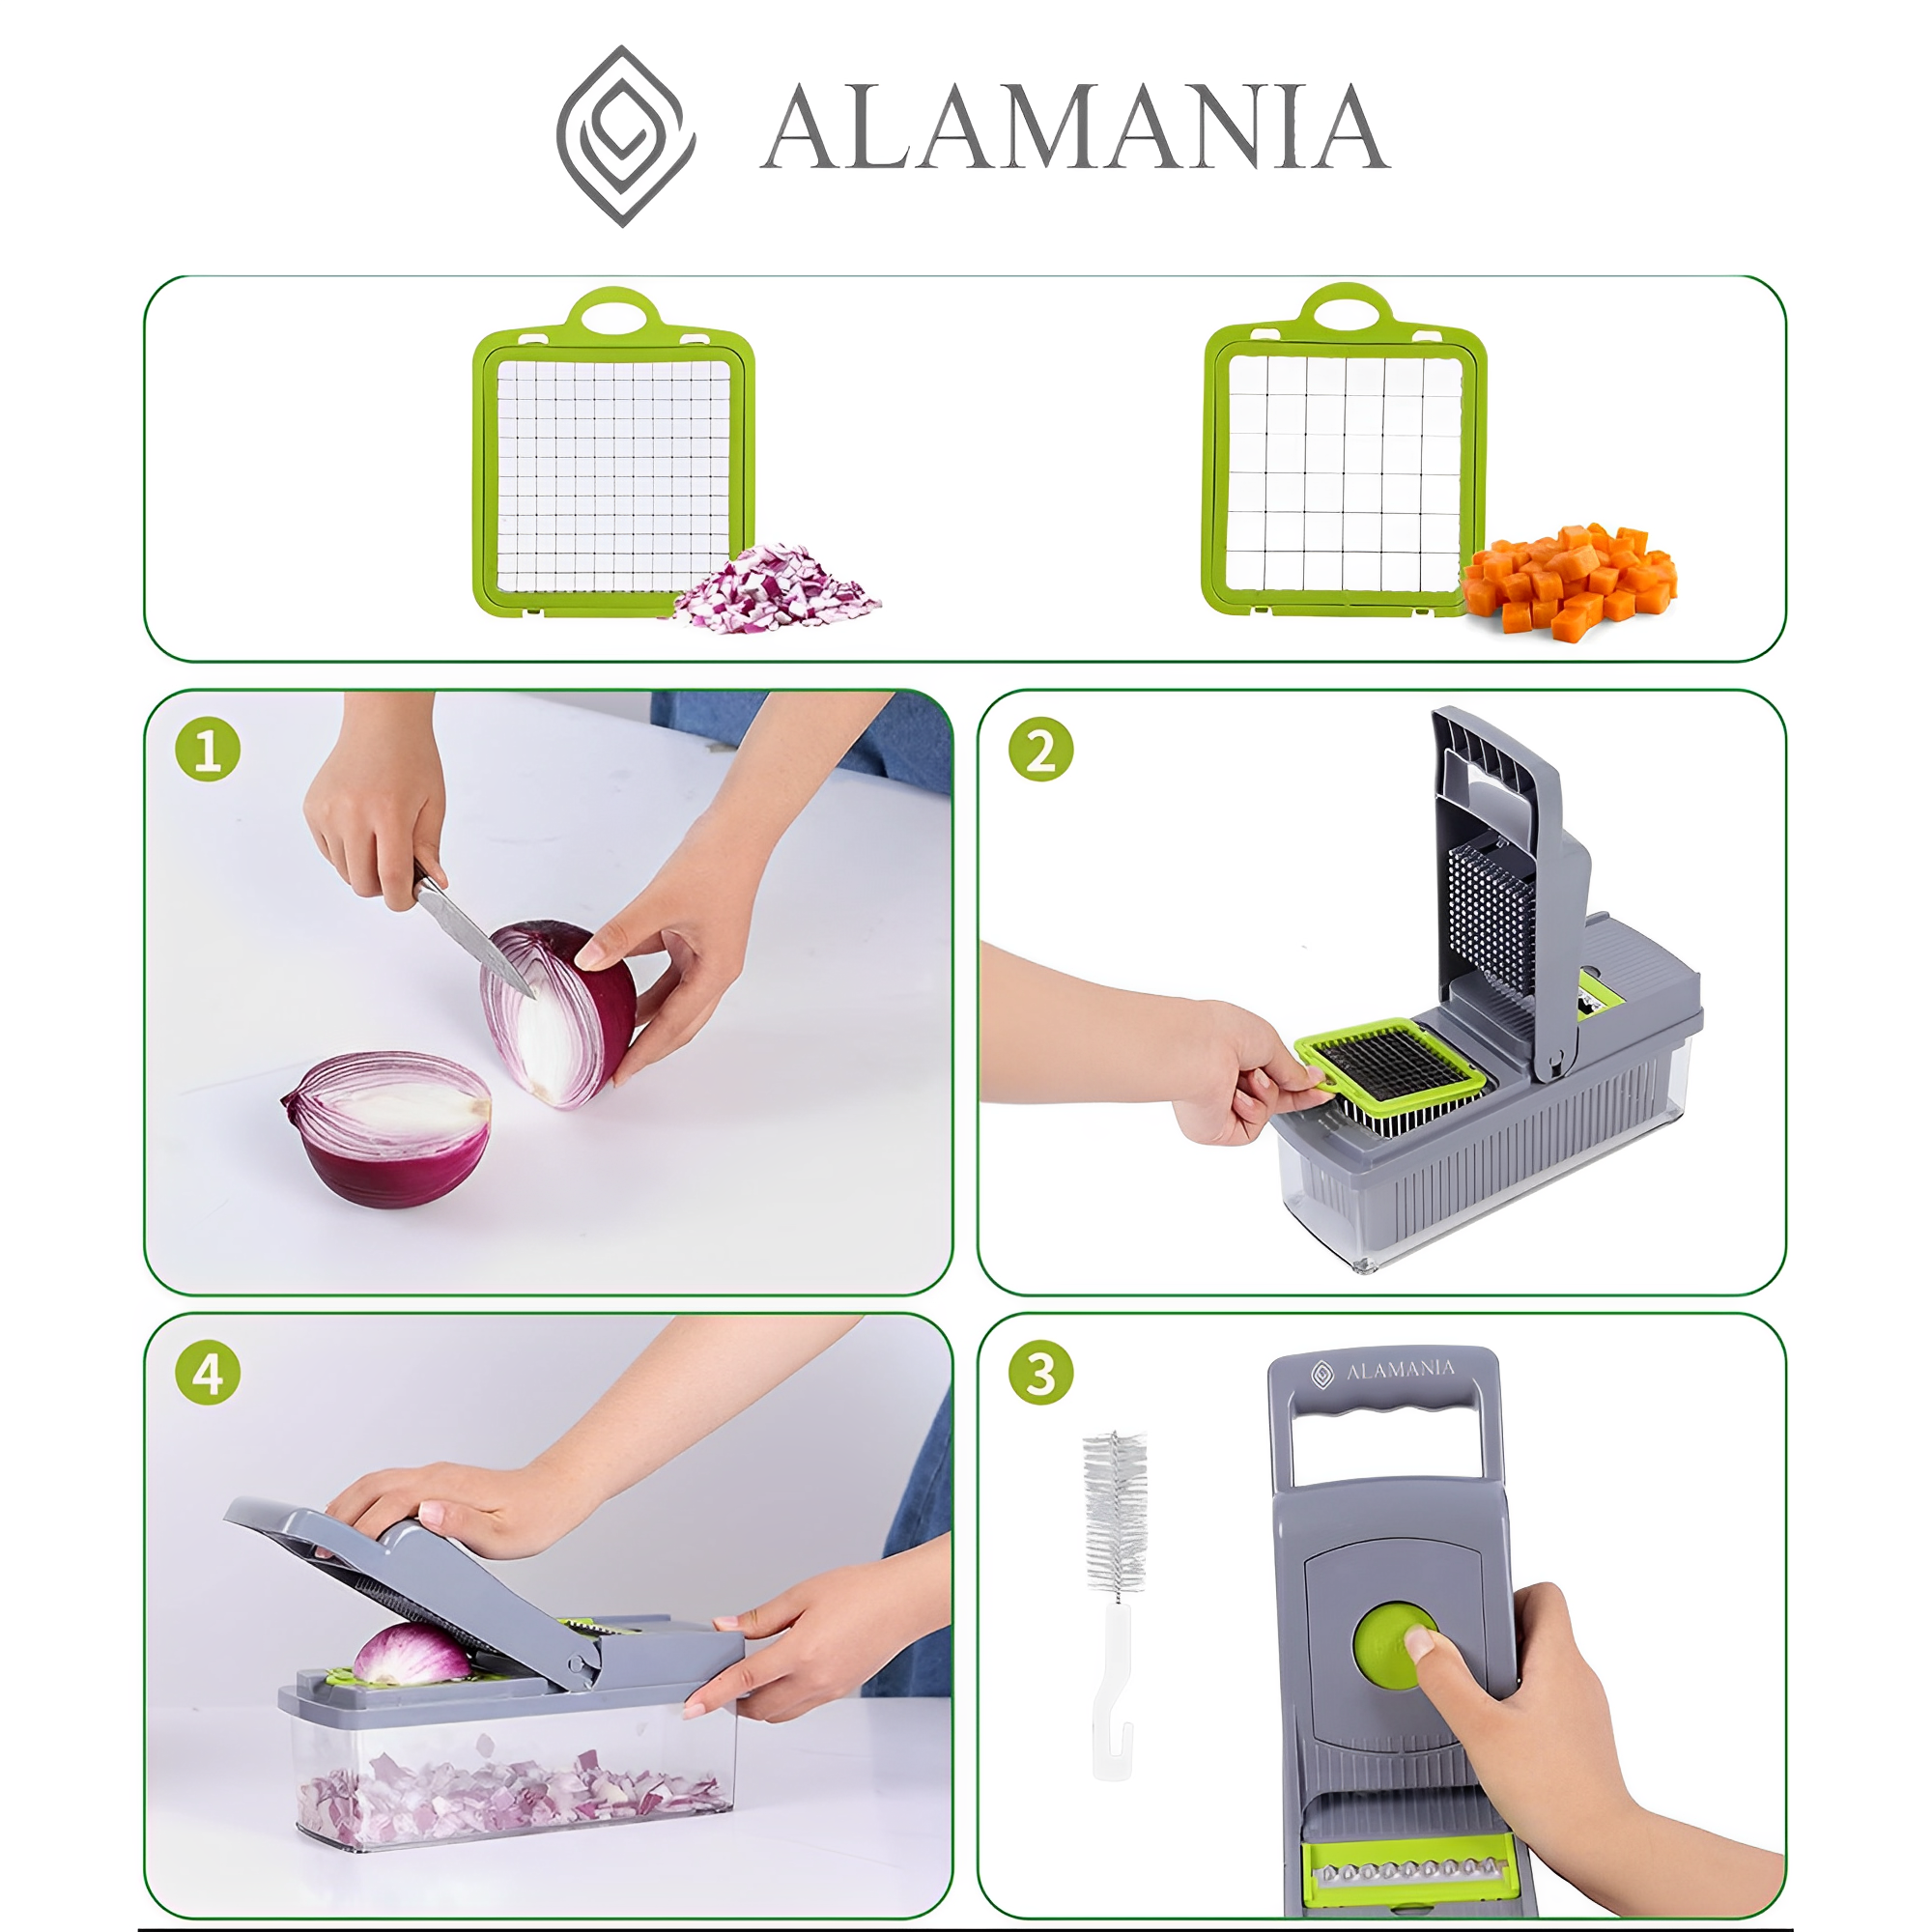 ALAMANIA Push Button Cleaner Advanced Vegetable Chopper, 14-in-1 Safe Chopper Vegetable Cutter, Onion Chopper,Veggie Chopper,Chopper,Food Chopper,Vegetable Slicer.